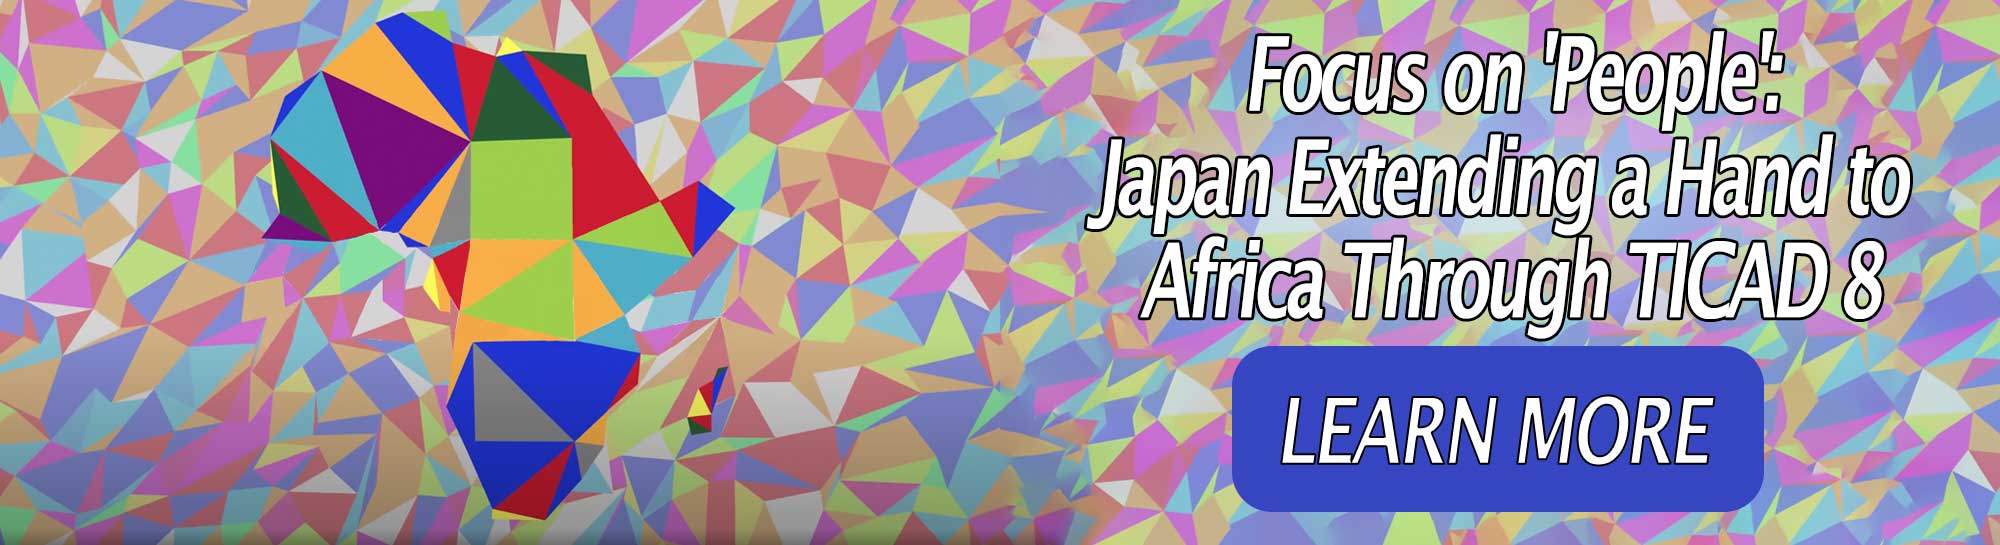 Focus on 'People': Japan Extending a Hand to Africa Through TICAD 8